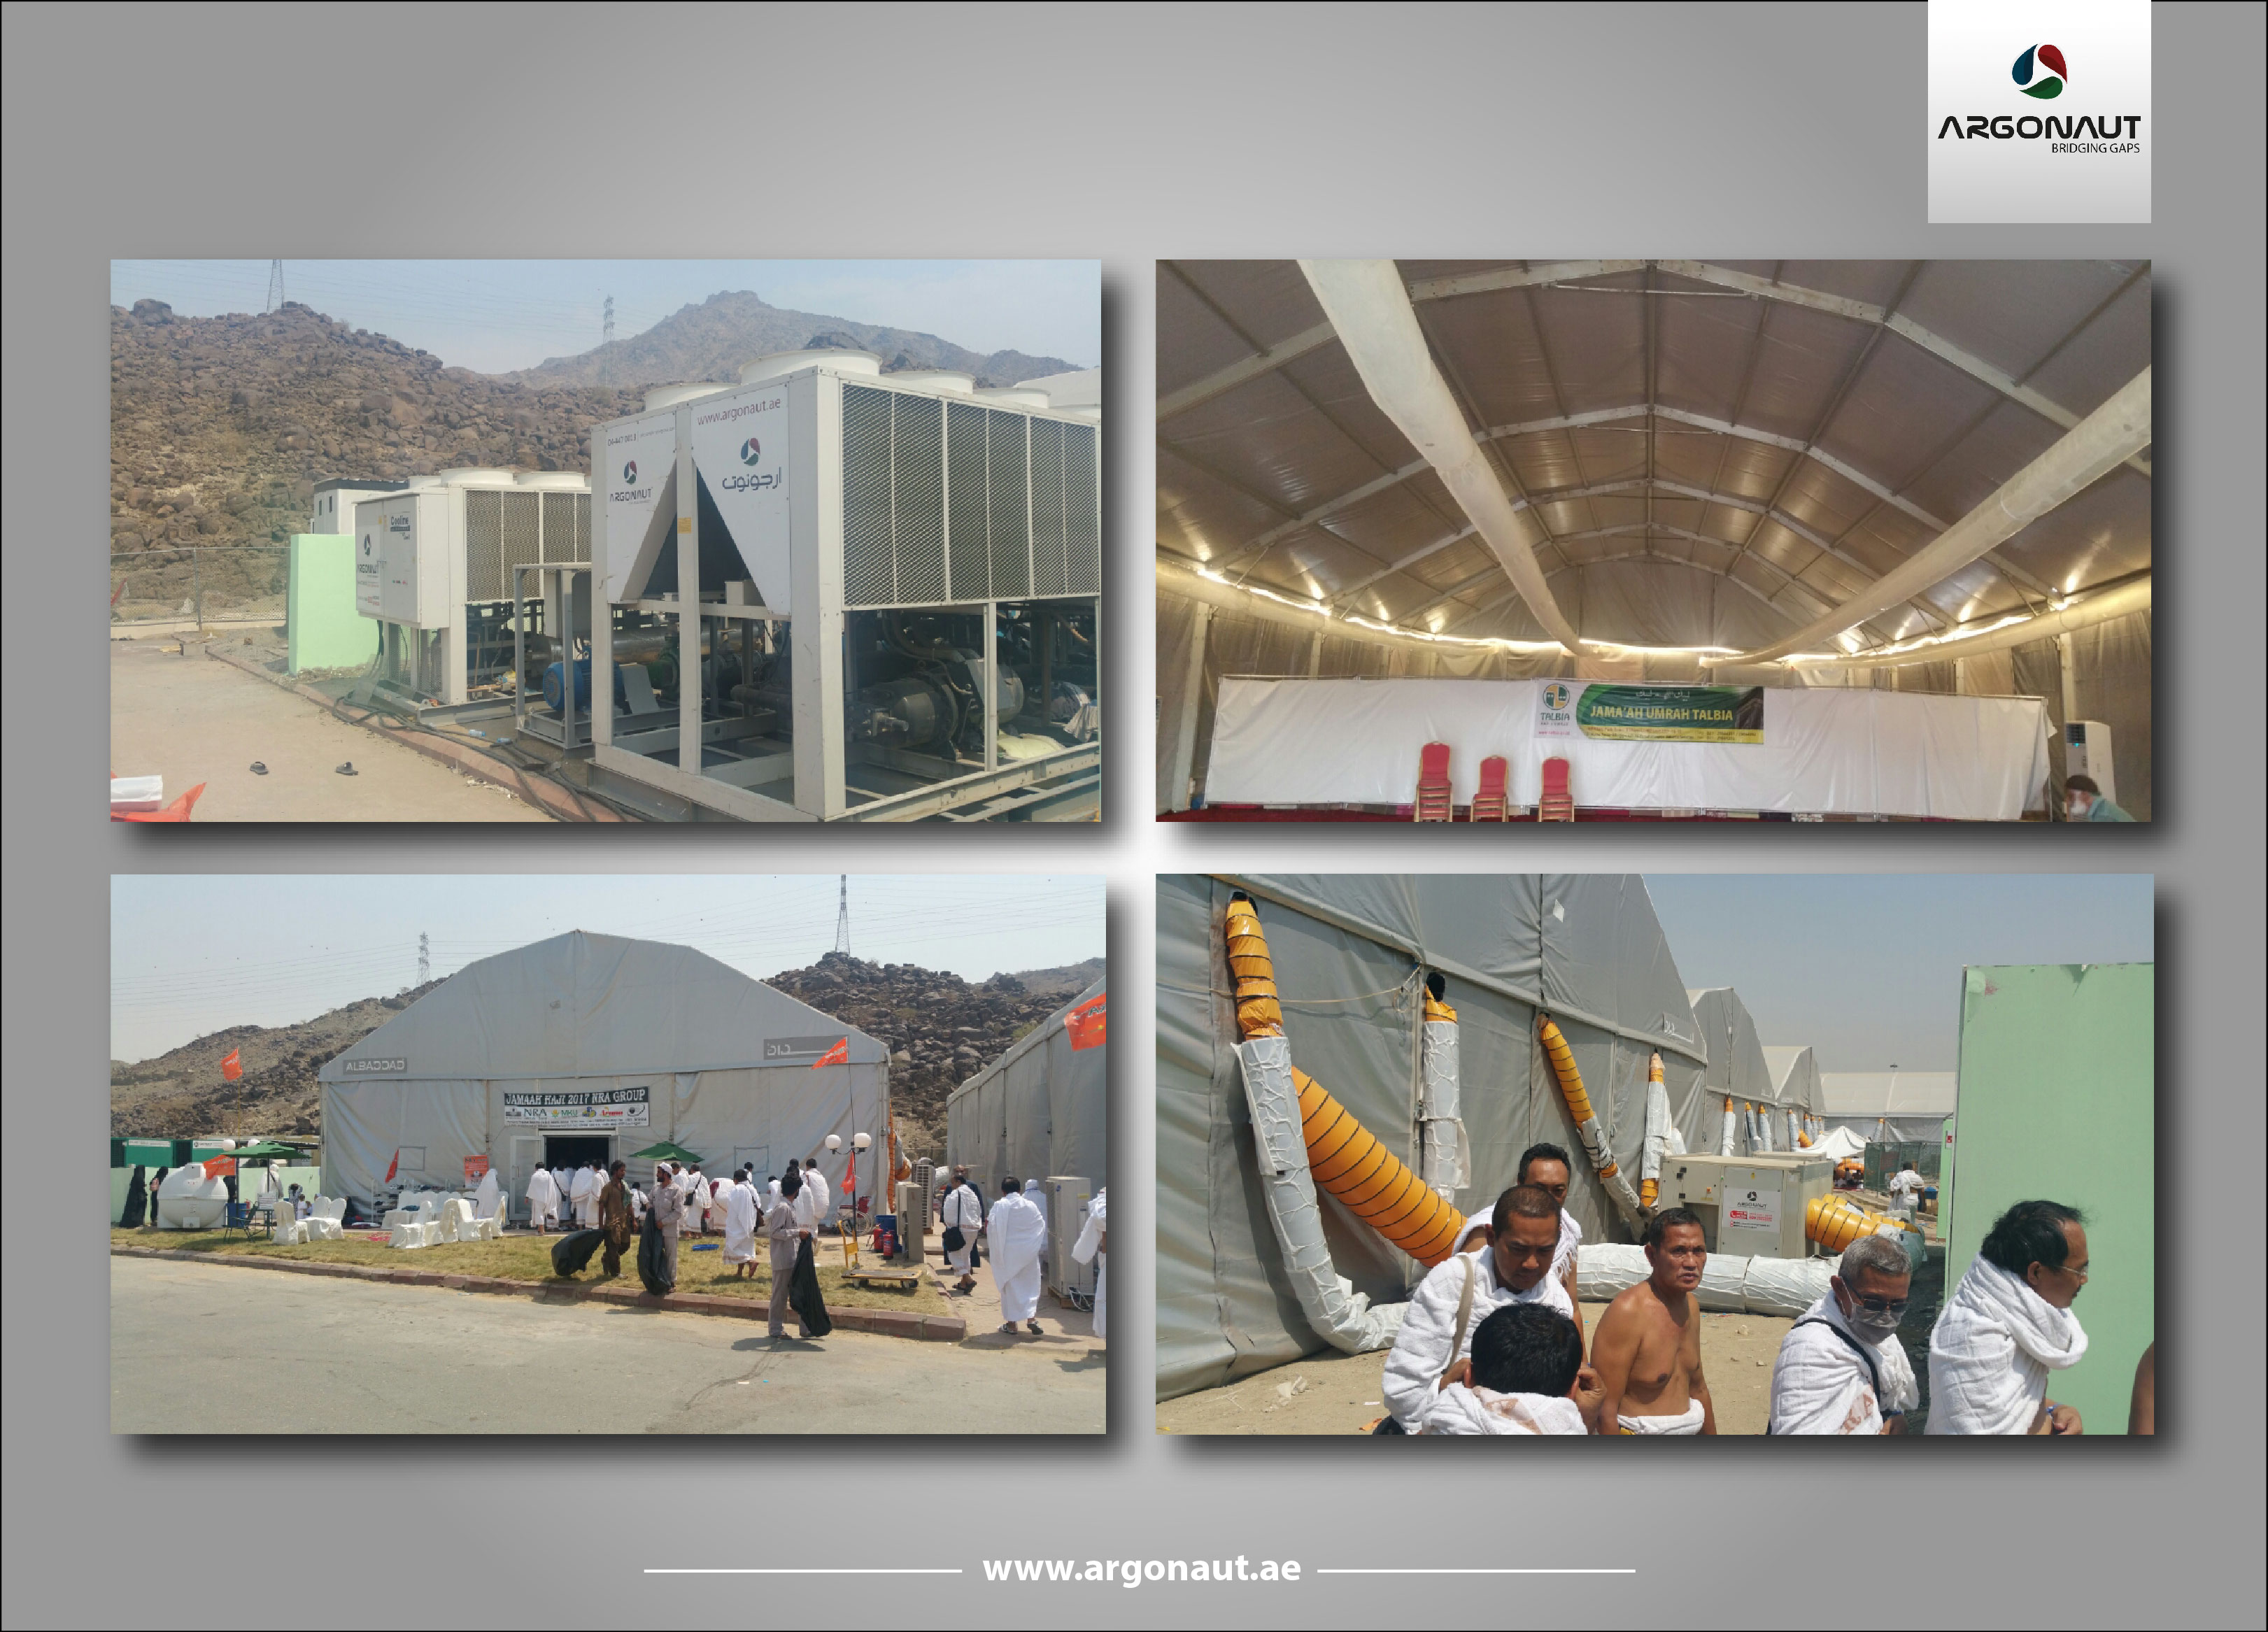 Argonaut Successfully Stepped in Arafat as the First Temporary Cooling Company for Arafat Tents.